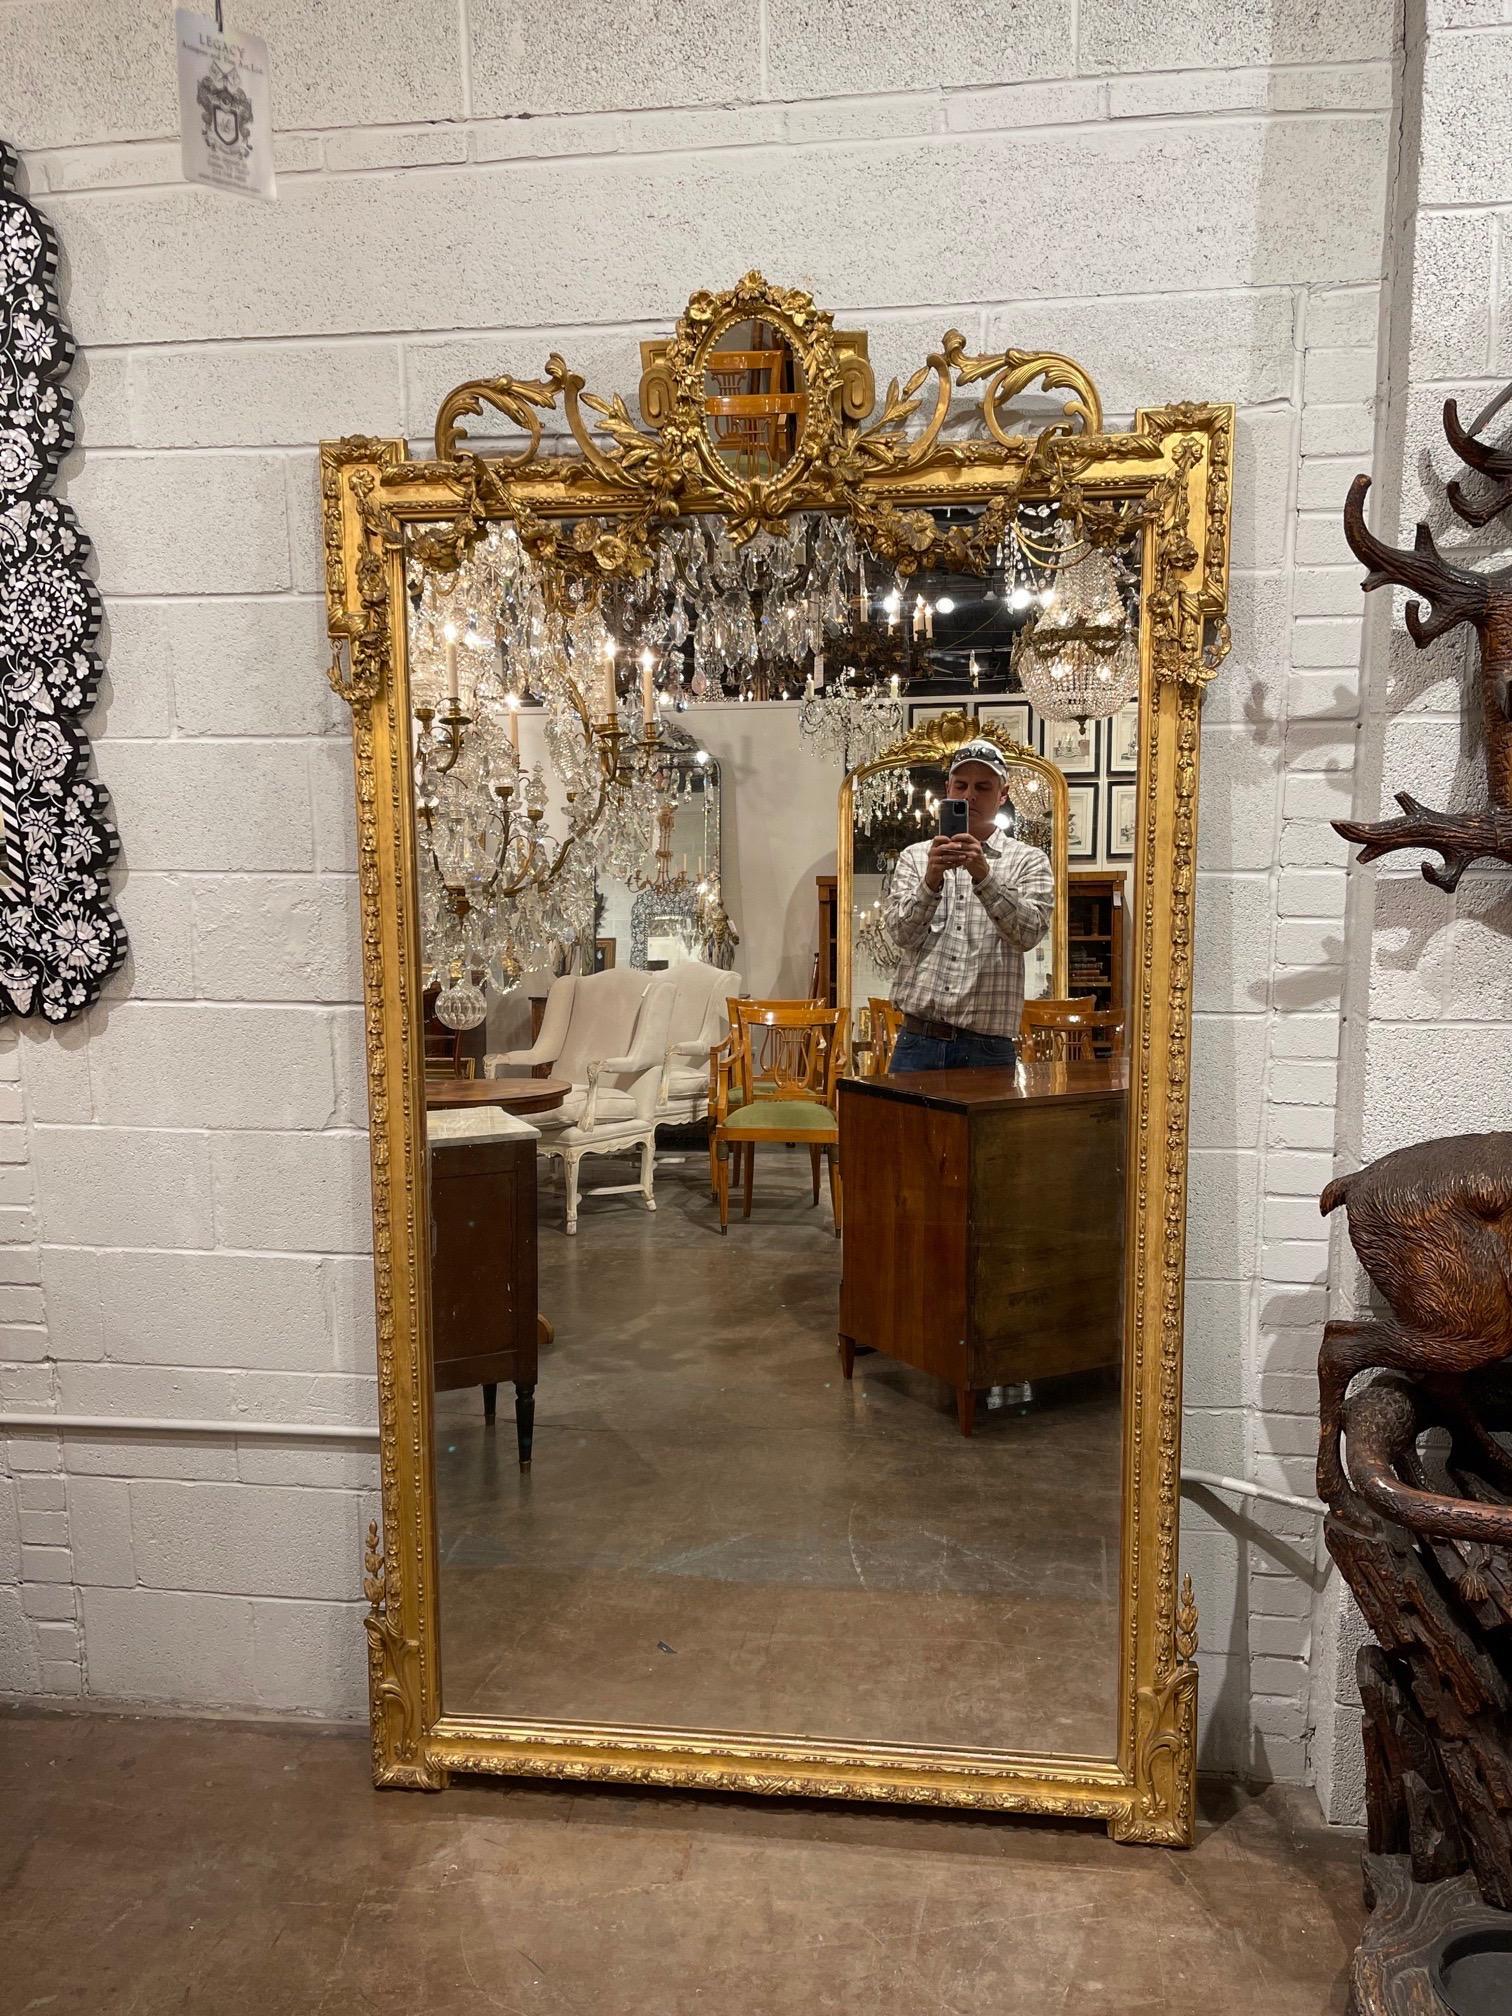 Exceptional companion pair of 19th century French Louis XVI style carved and giltwood mirror. Very fine carvings and beautiful gilt on this pair. Makes a very impressive statement!
Note: Sizes are slightly different 46 x 85 and 49 x 87.